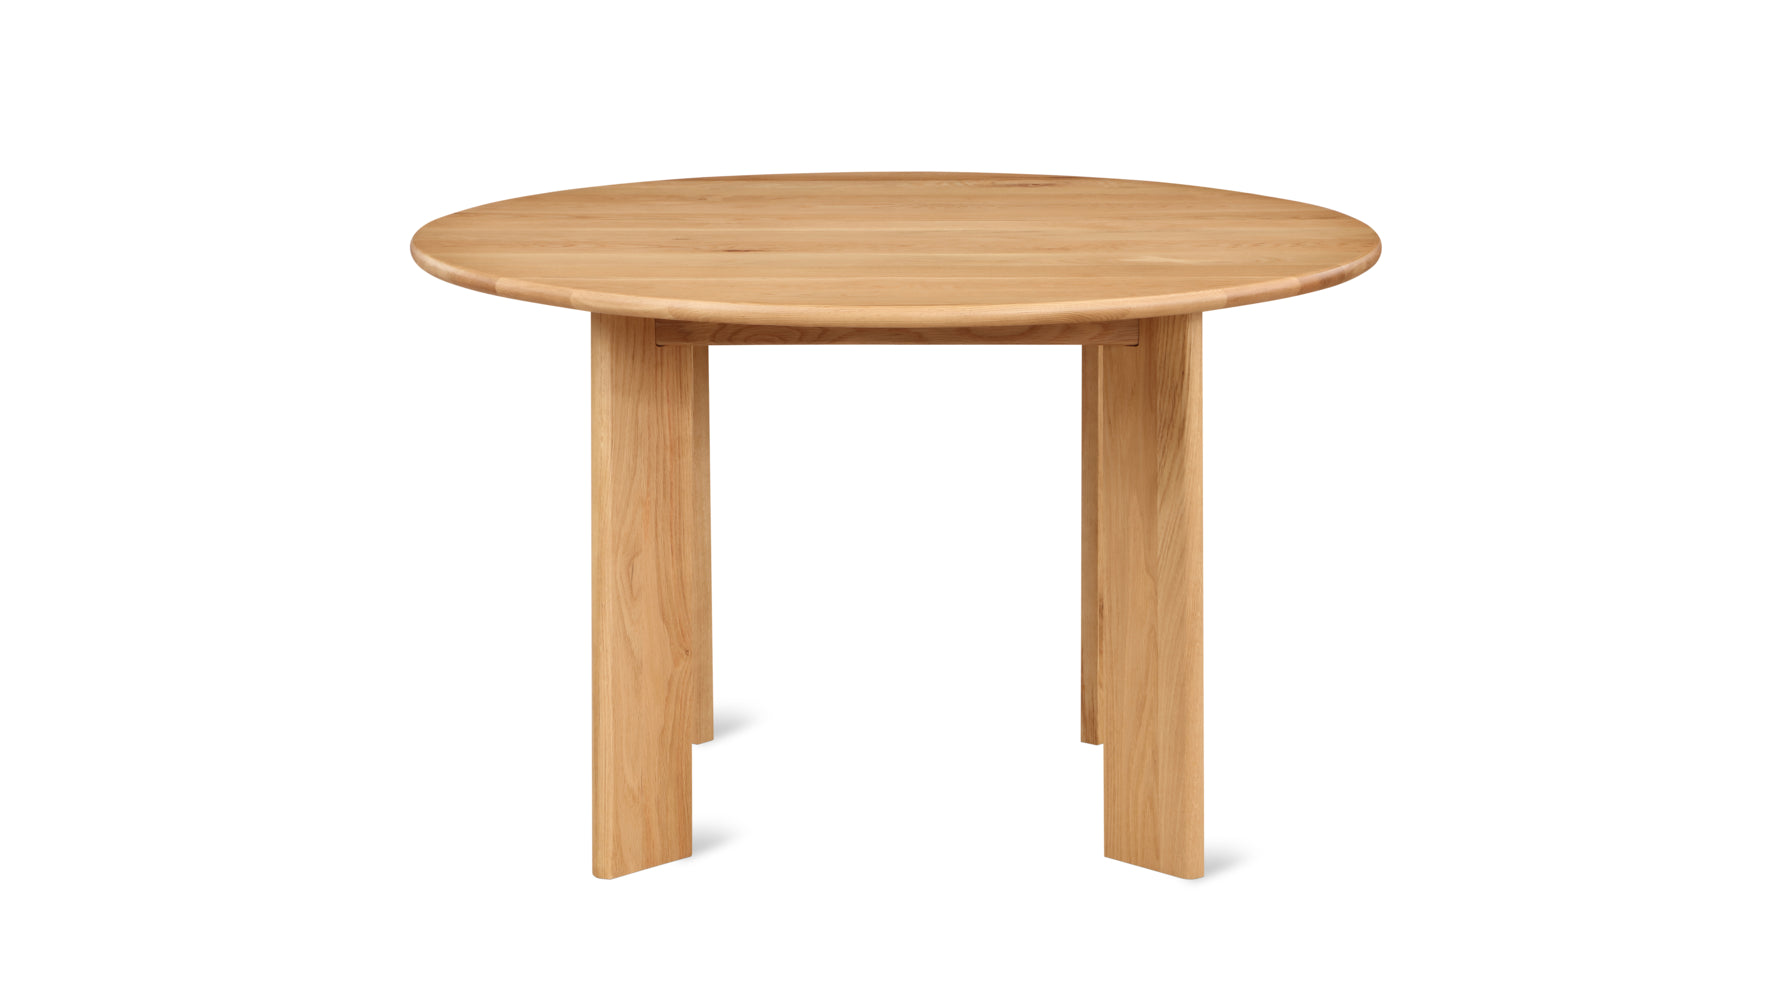 Frame Round Dining Table, Seats 4-5 People, Oak - Image 4